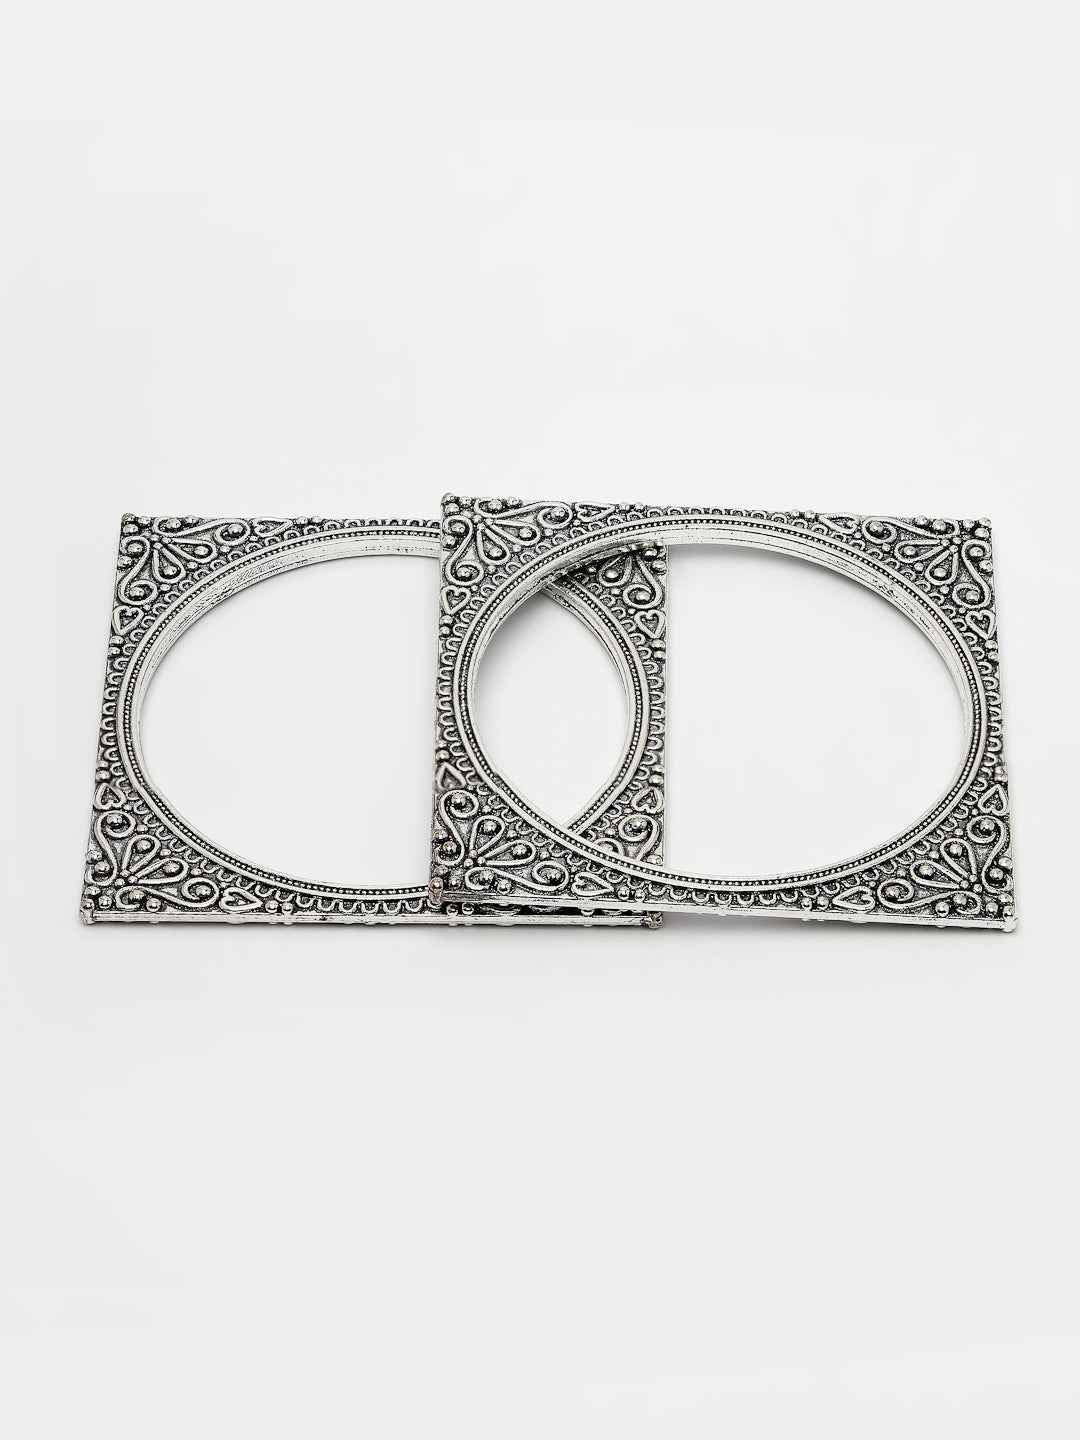 Women's Set Of 2 Silver-Toned Oxidized Square Shaped Bangles - Nvr